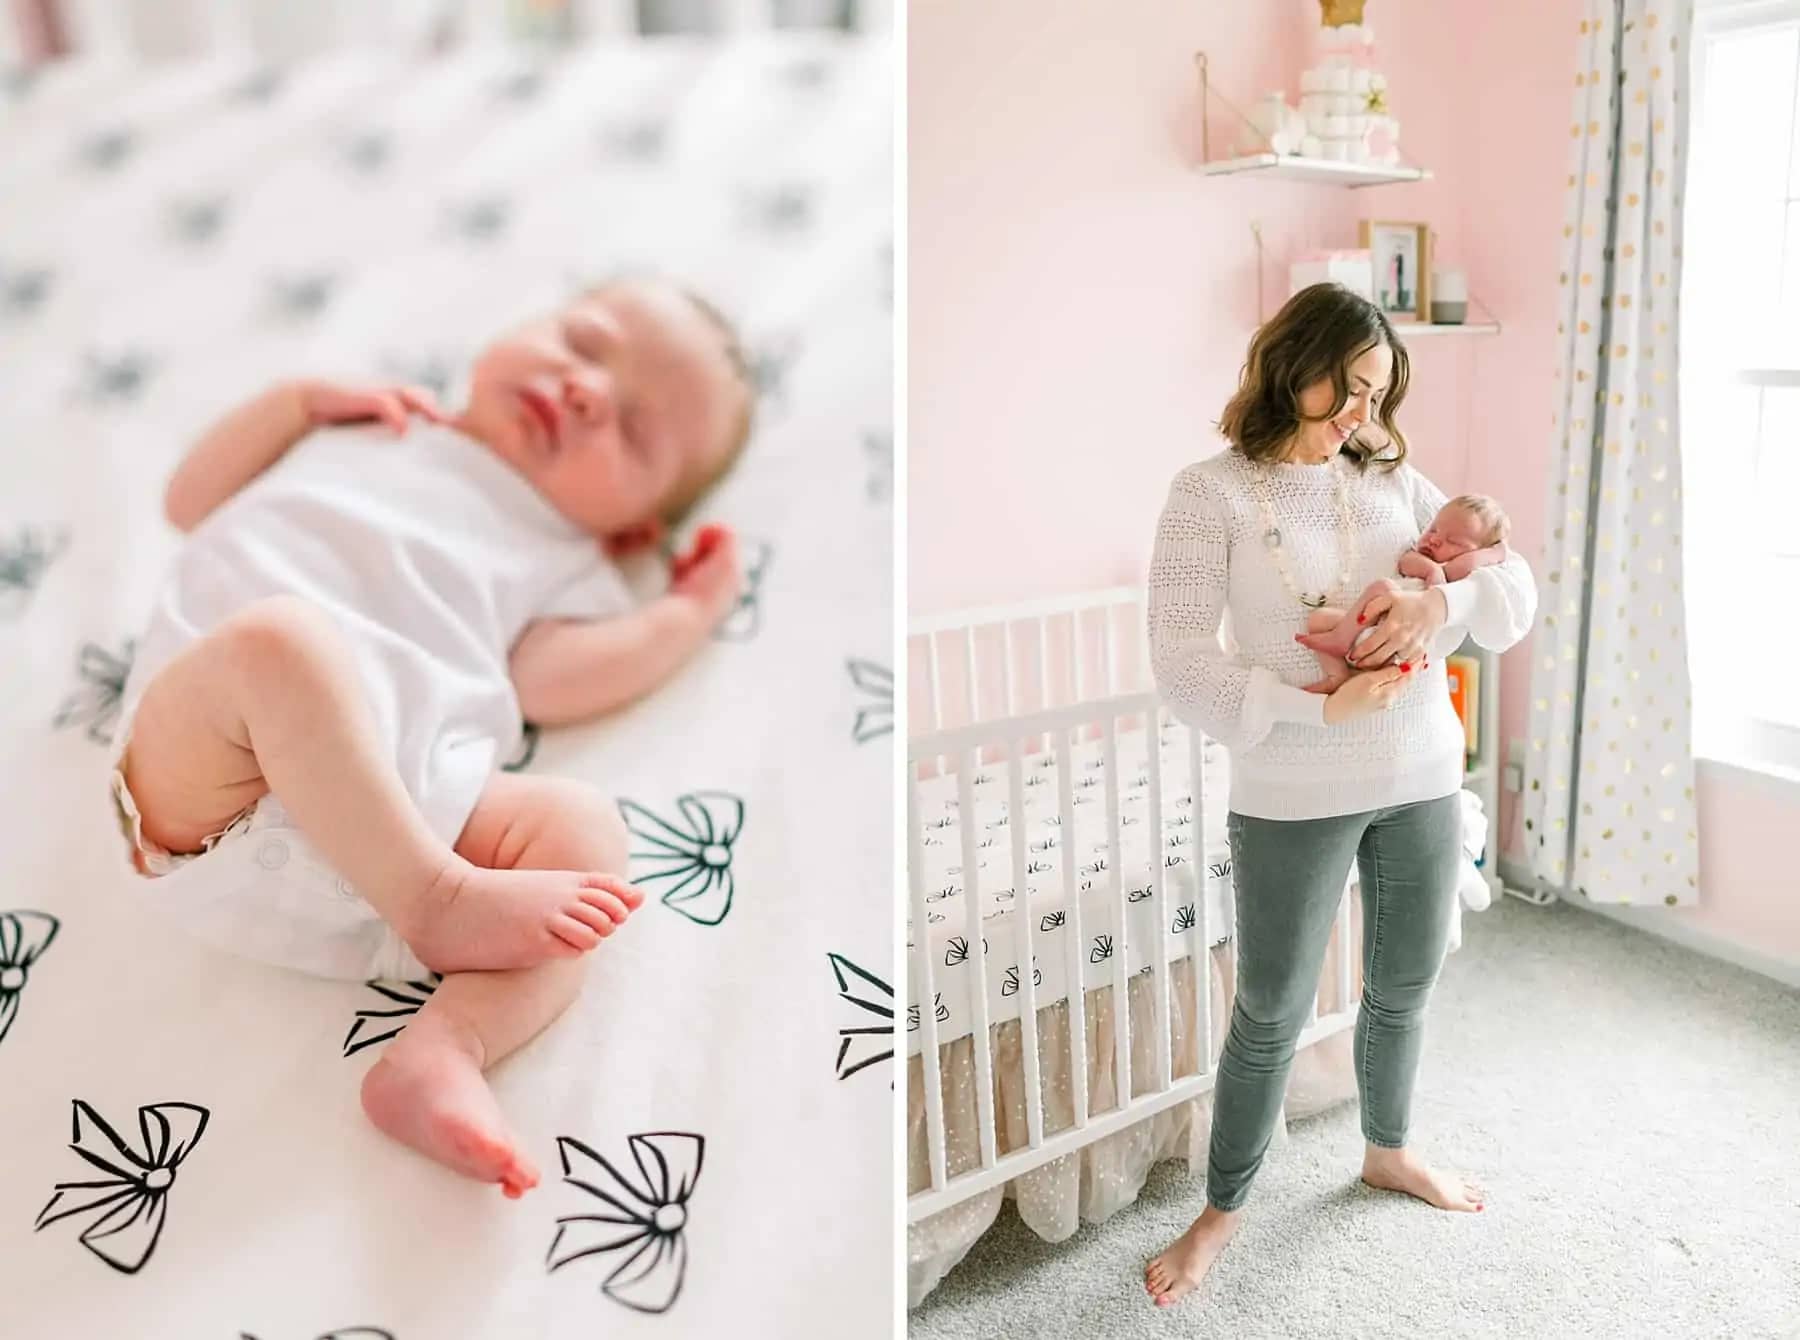 Focus on baby toes and mom holding baby in front of jenny lind white crib in Pink & Gold Kate Spade Inspired Nursery